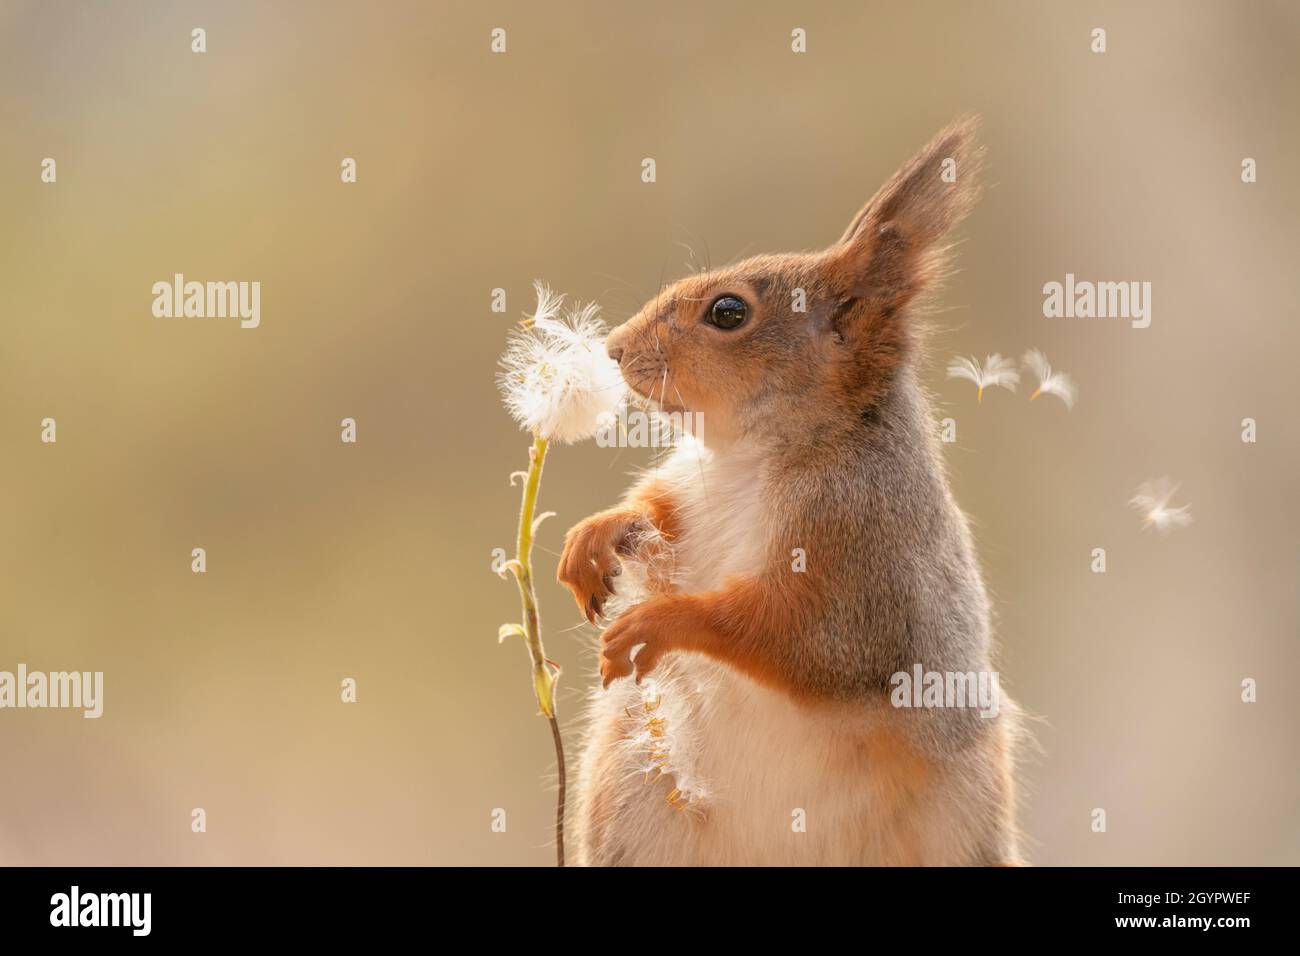 red squirrel is looking at a dandelion with flying seeds Stock Photo